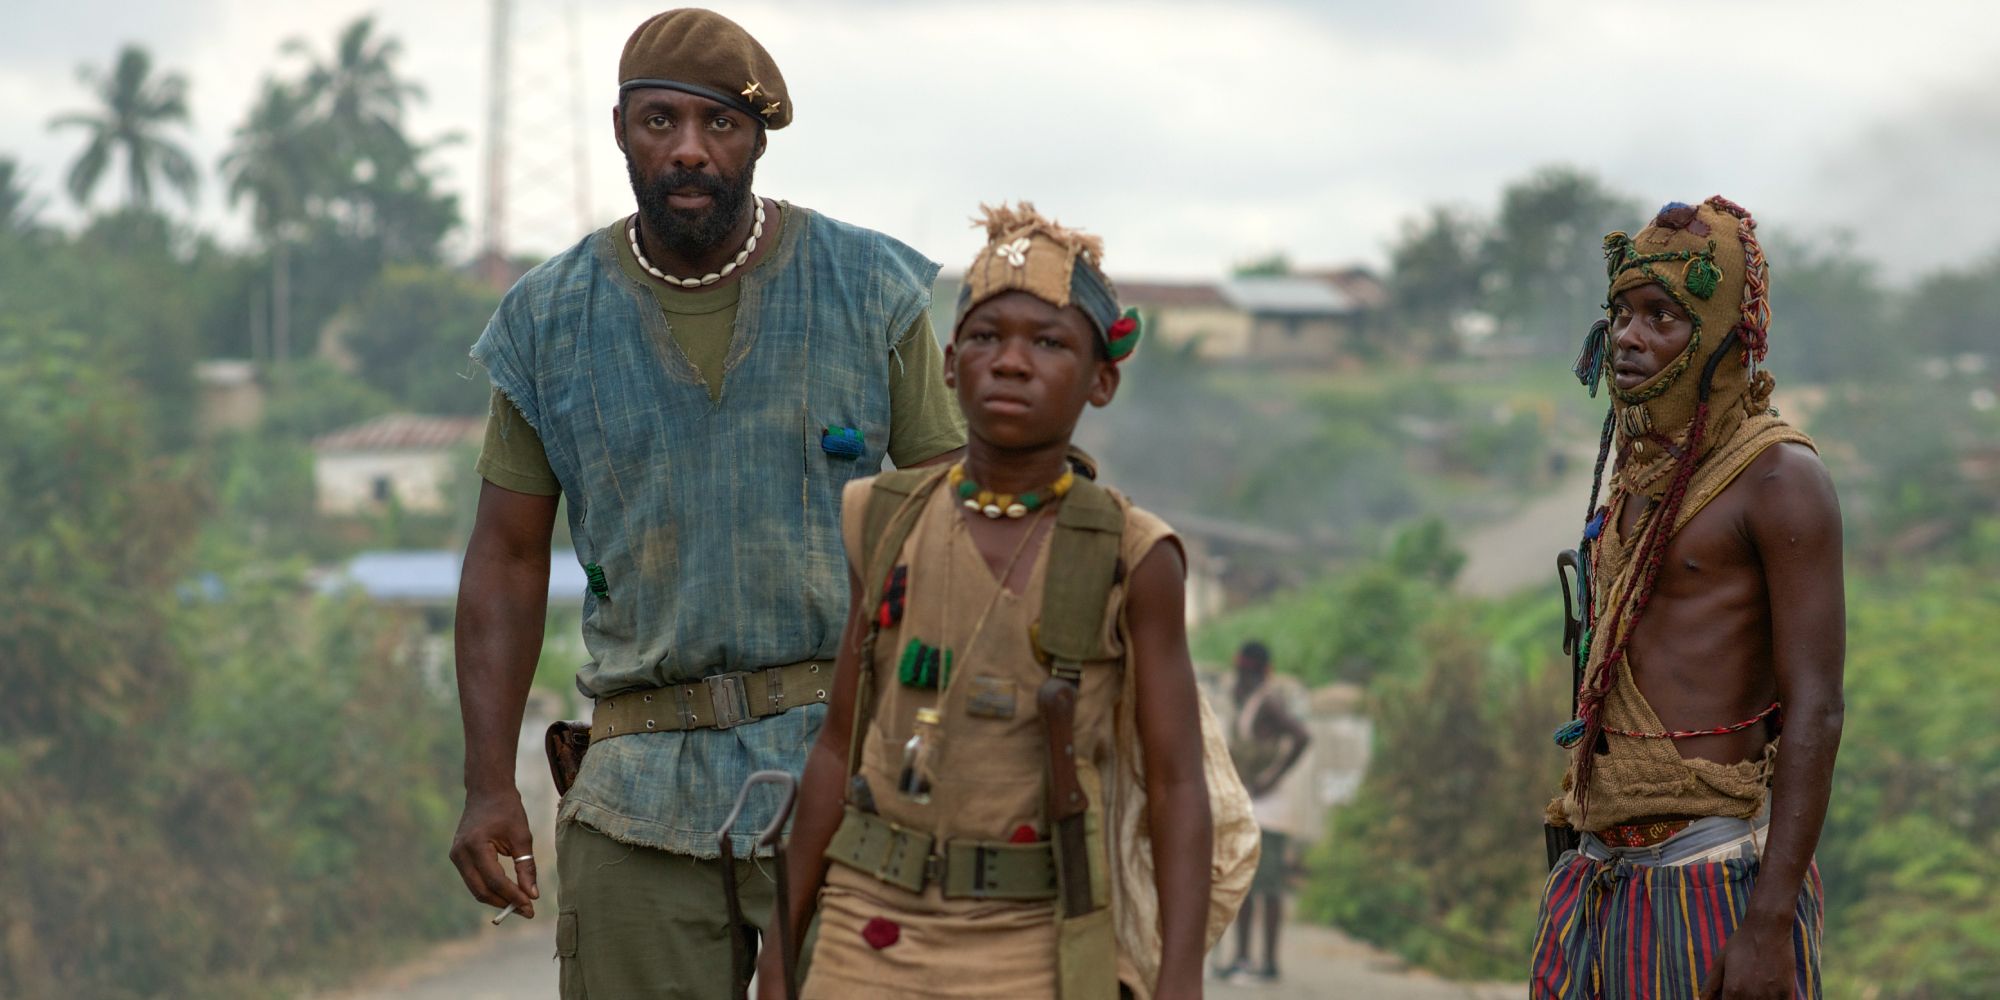 Idris Elba as Commandant and Abraham Attah as Agu stand side-by-side in the middle of the road in Beasts of No Nation